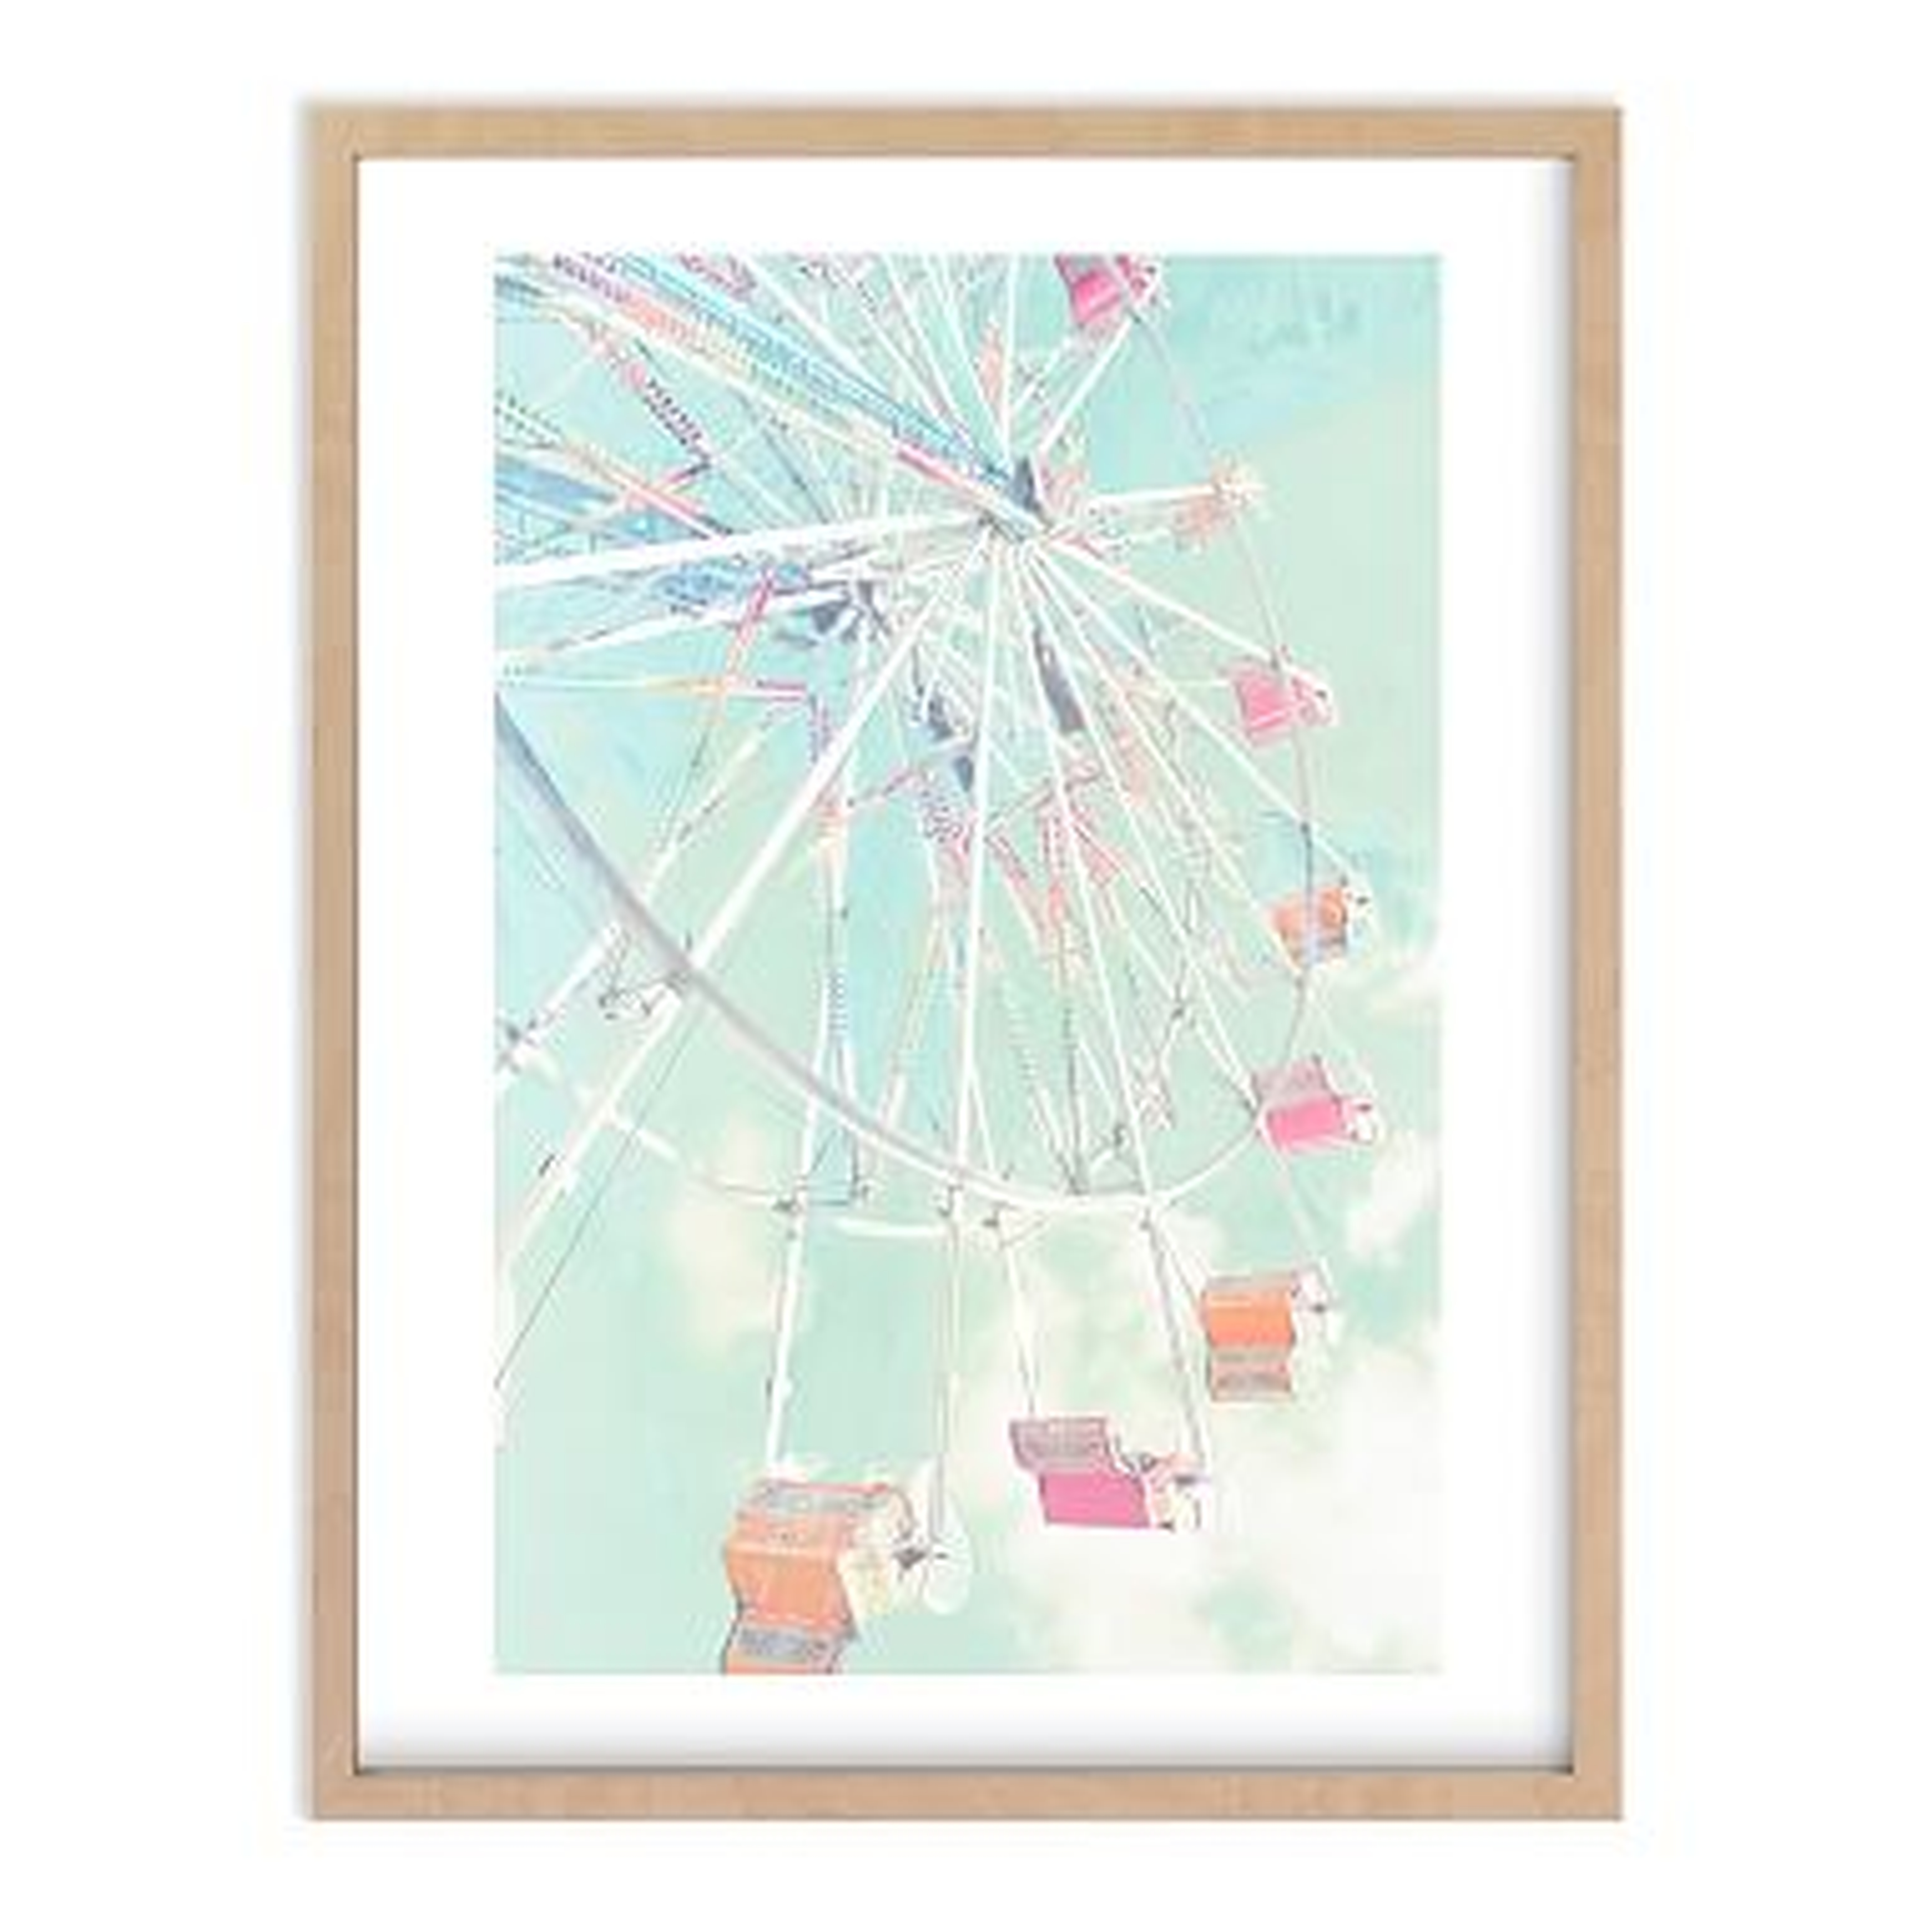 Fair Days 4 Wall Art by Minted(R), 16 x 20, Natural - Pottery Barn Teen